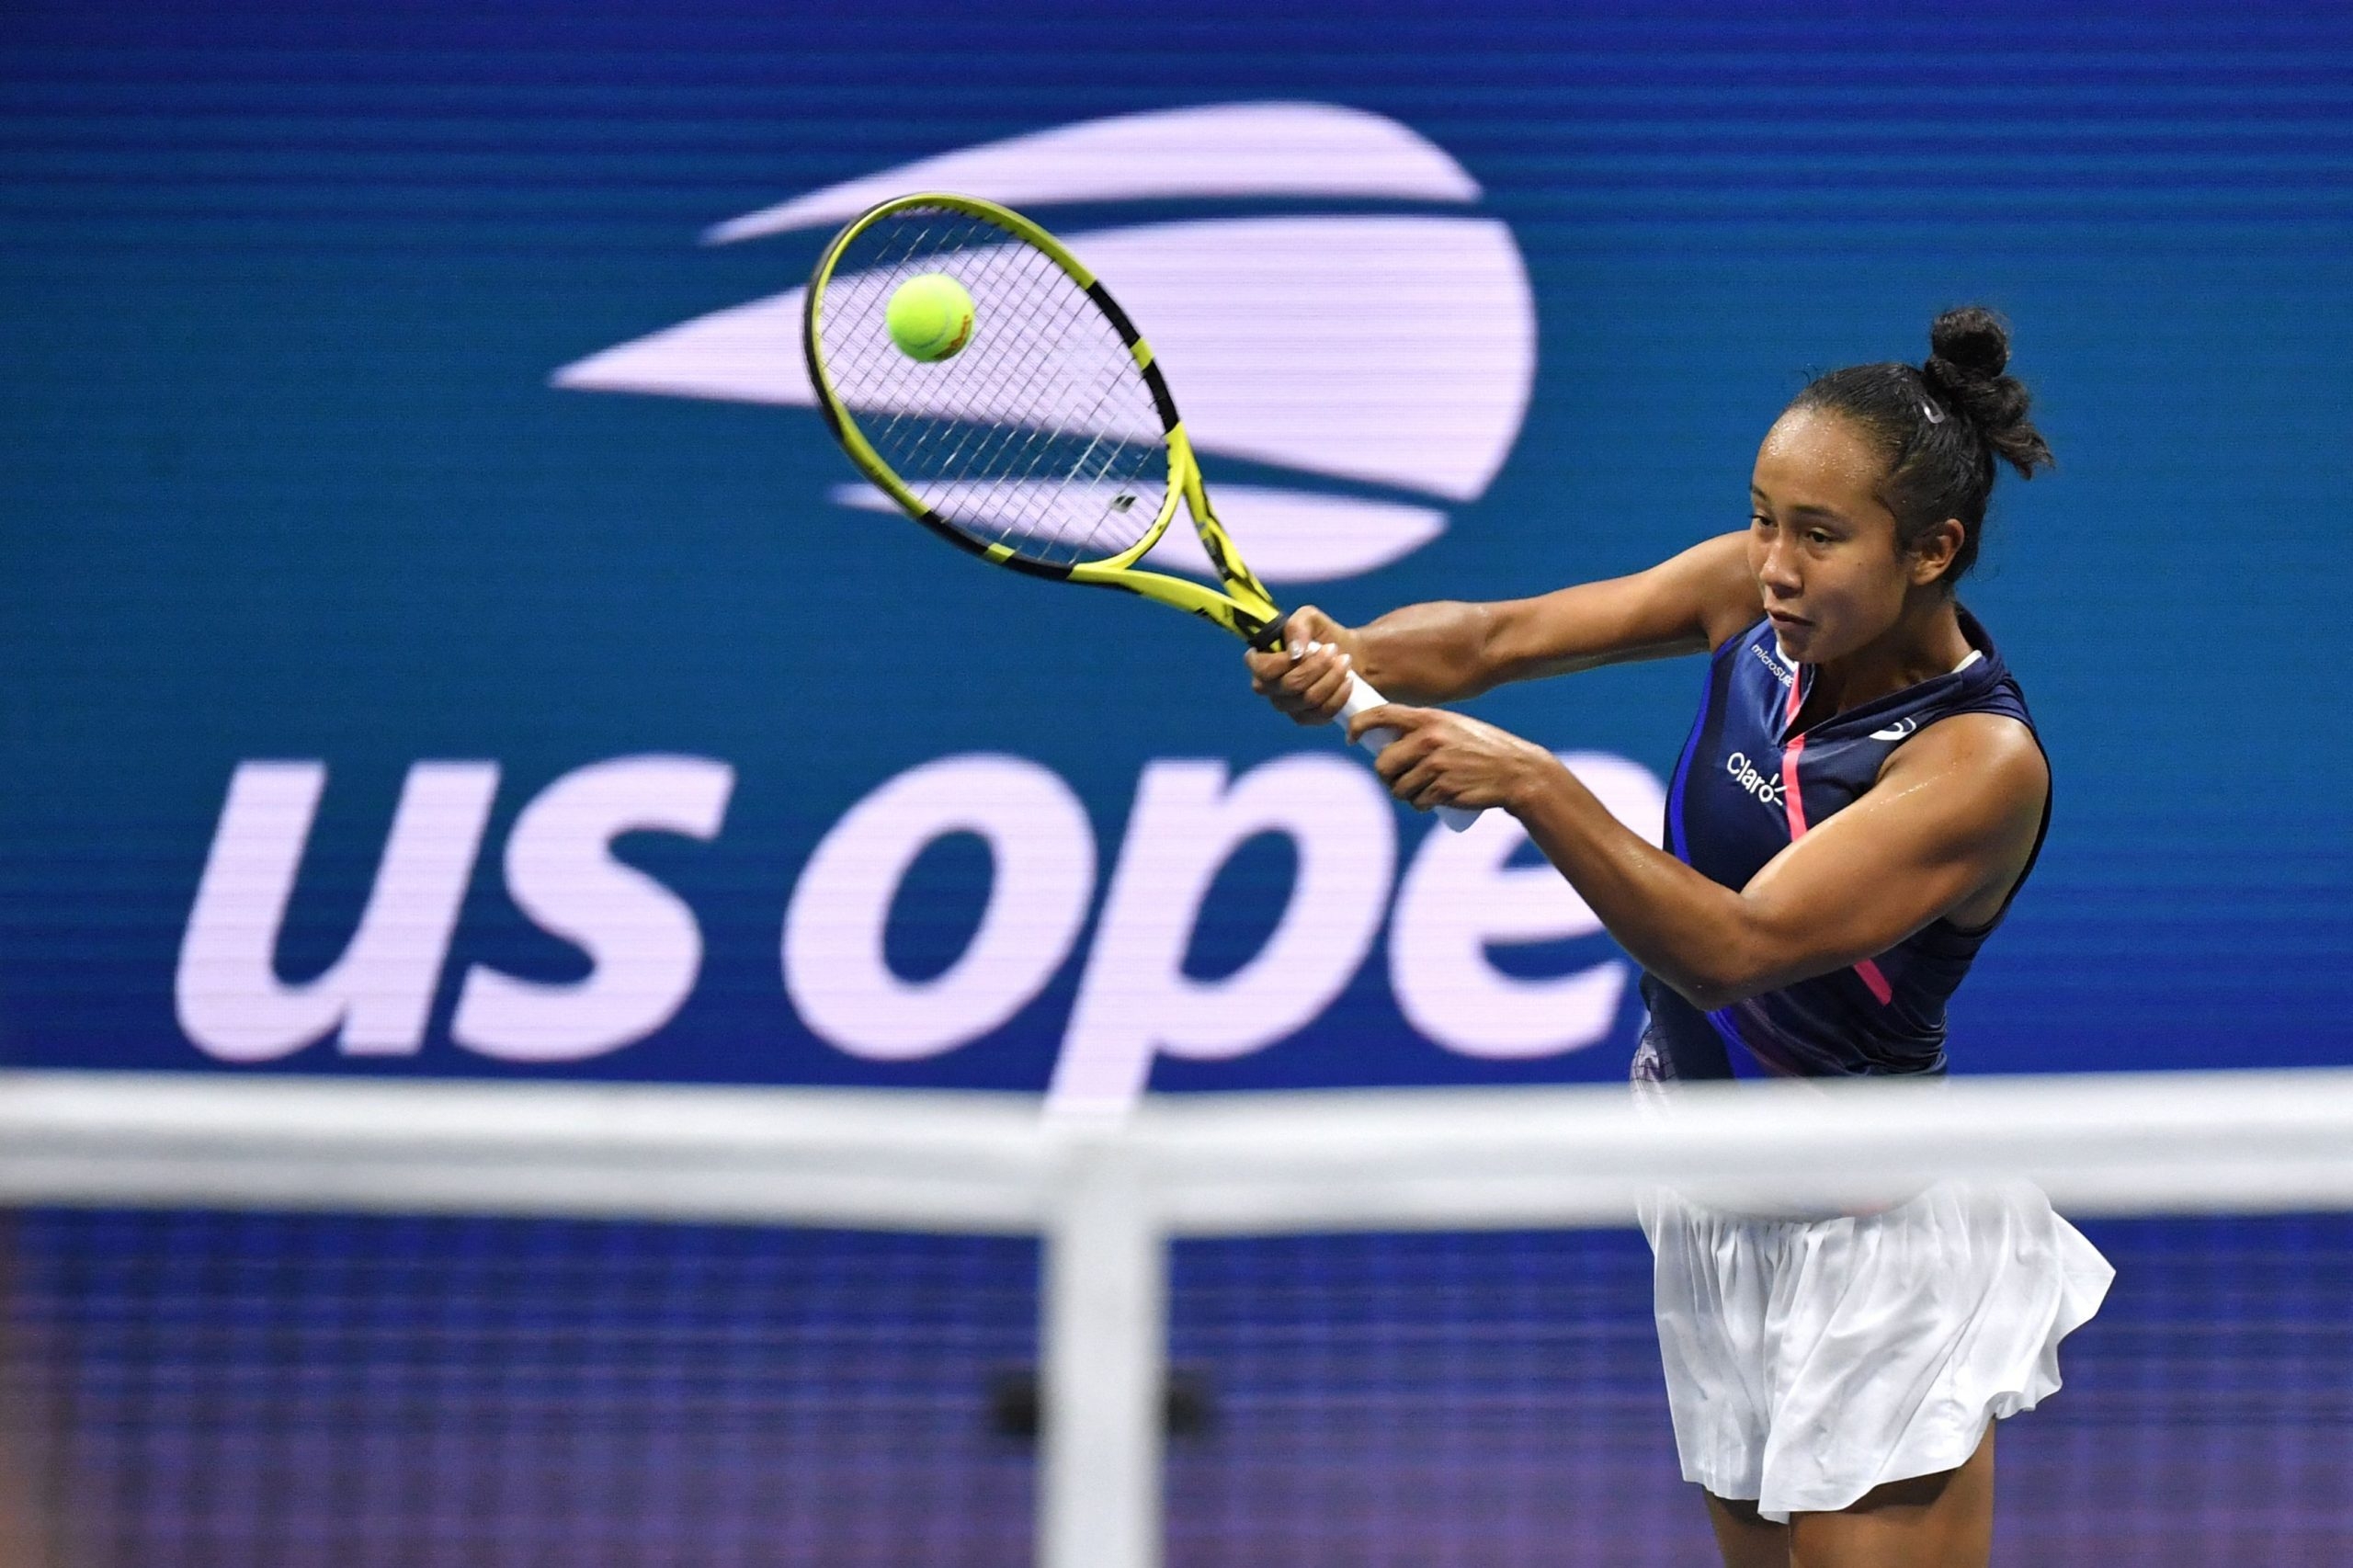 YAYLAH! Who is rising Canadian tennis star Leylah Fernandez? Find out